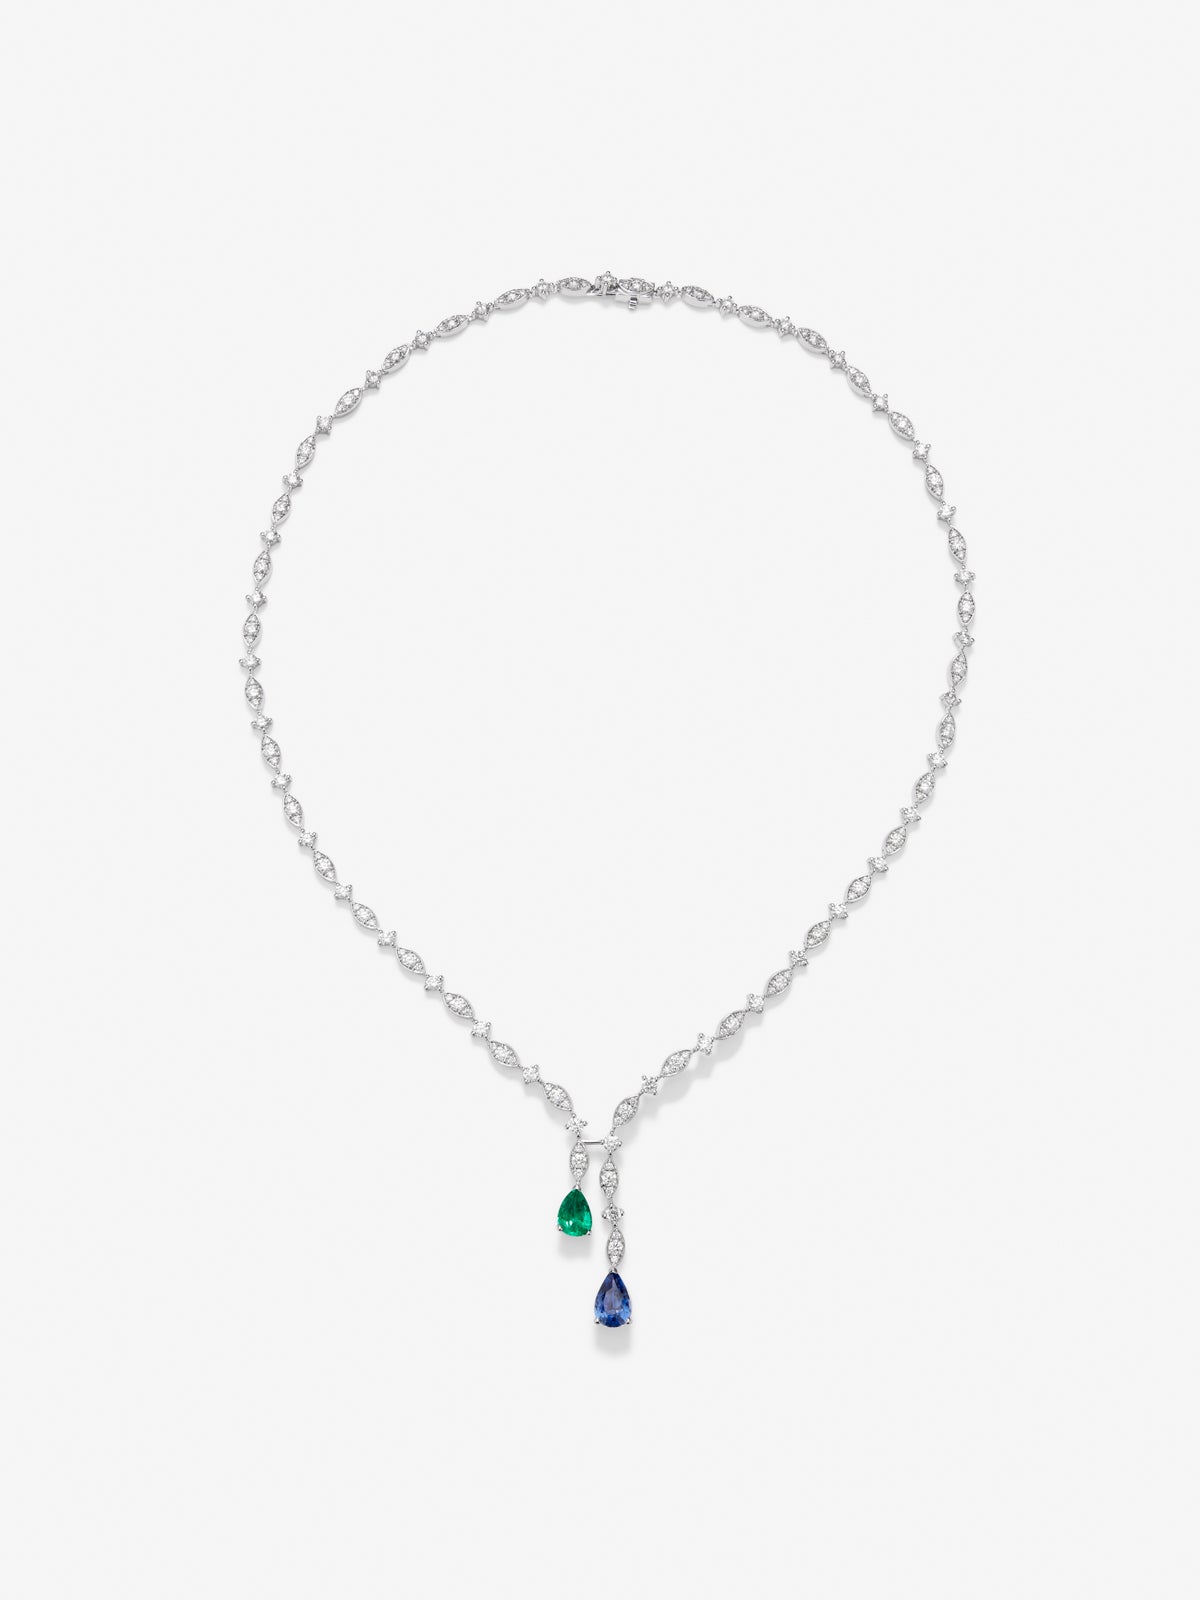 18K white gold necklace with intense blue pear-cut sapphire of 1.76 cts, pear-cut green emerald of 0.96 cts and 163 brilliant-cut diamonds with a total of 6.48 cts